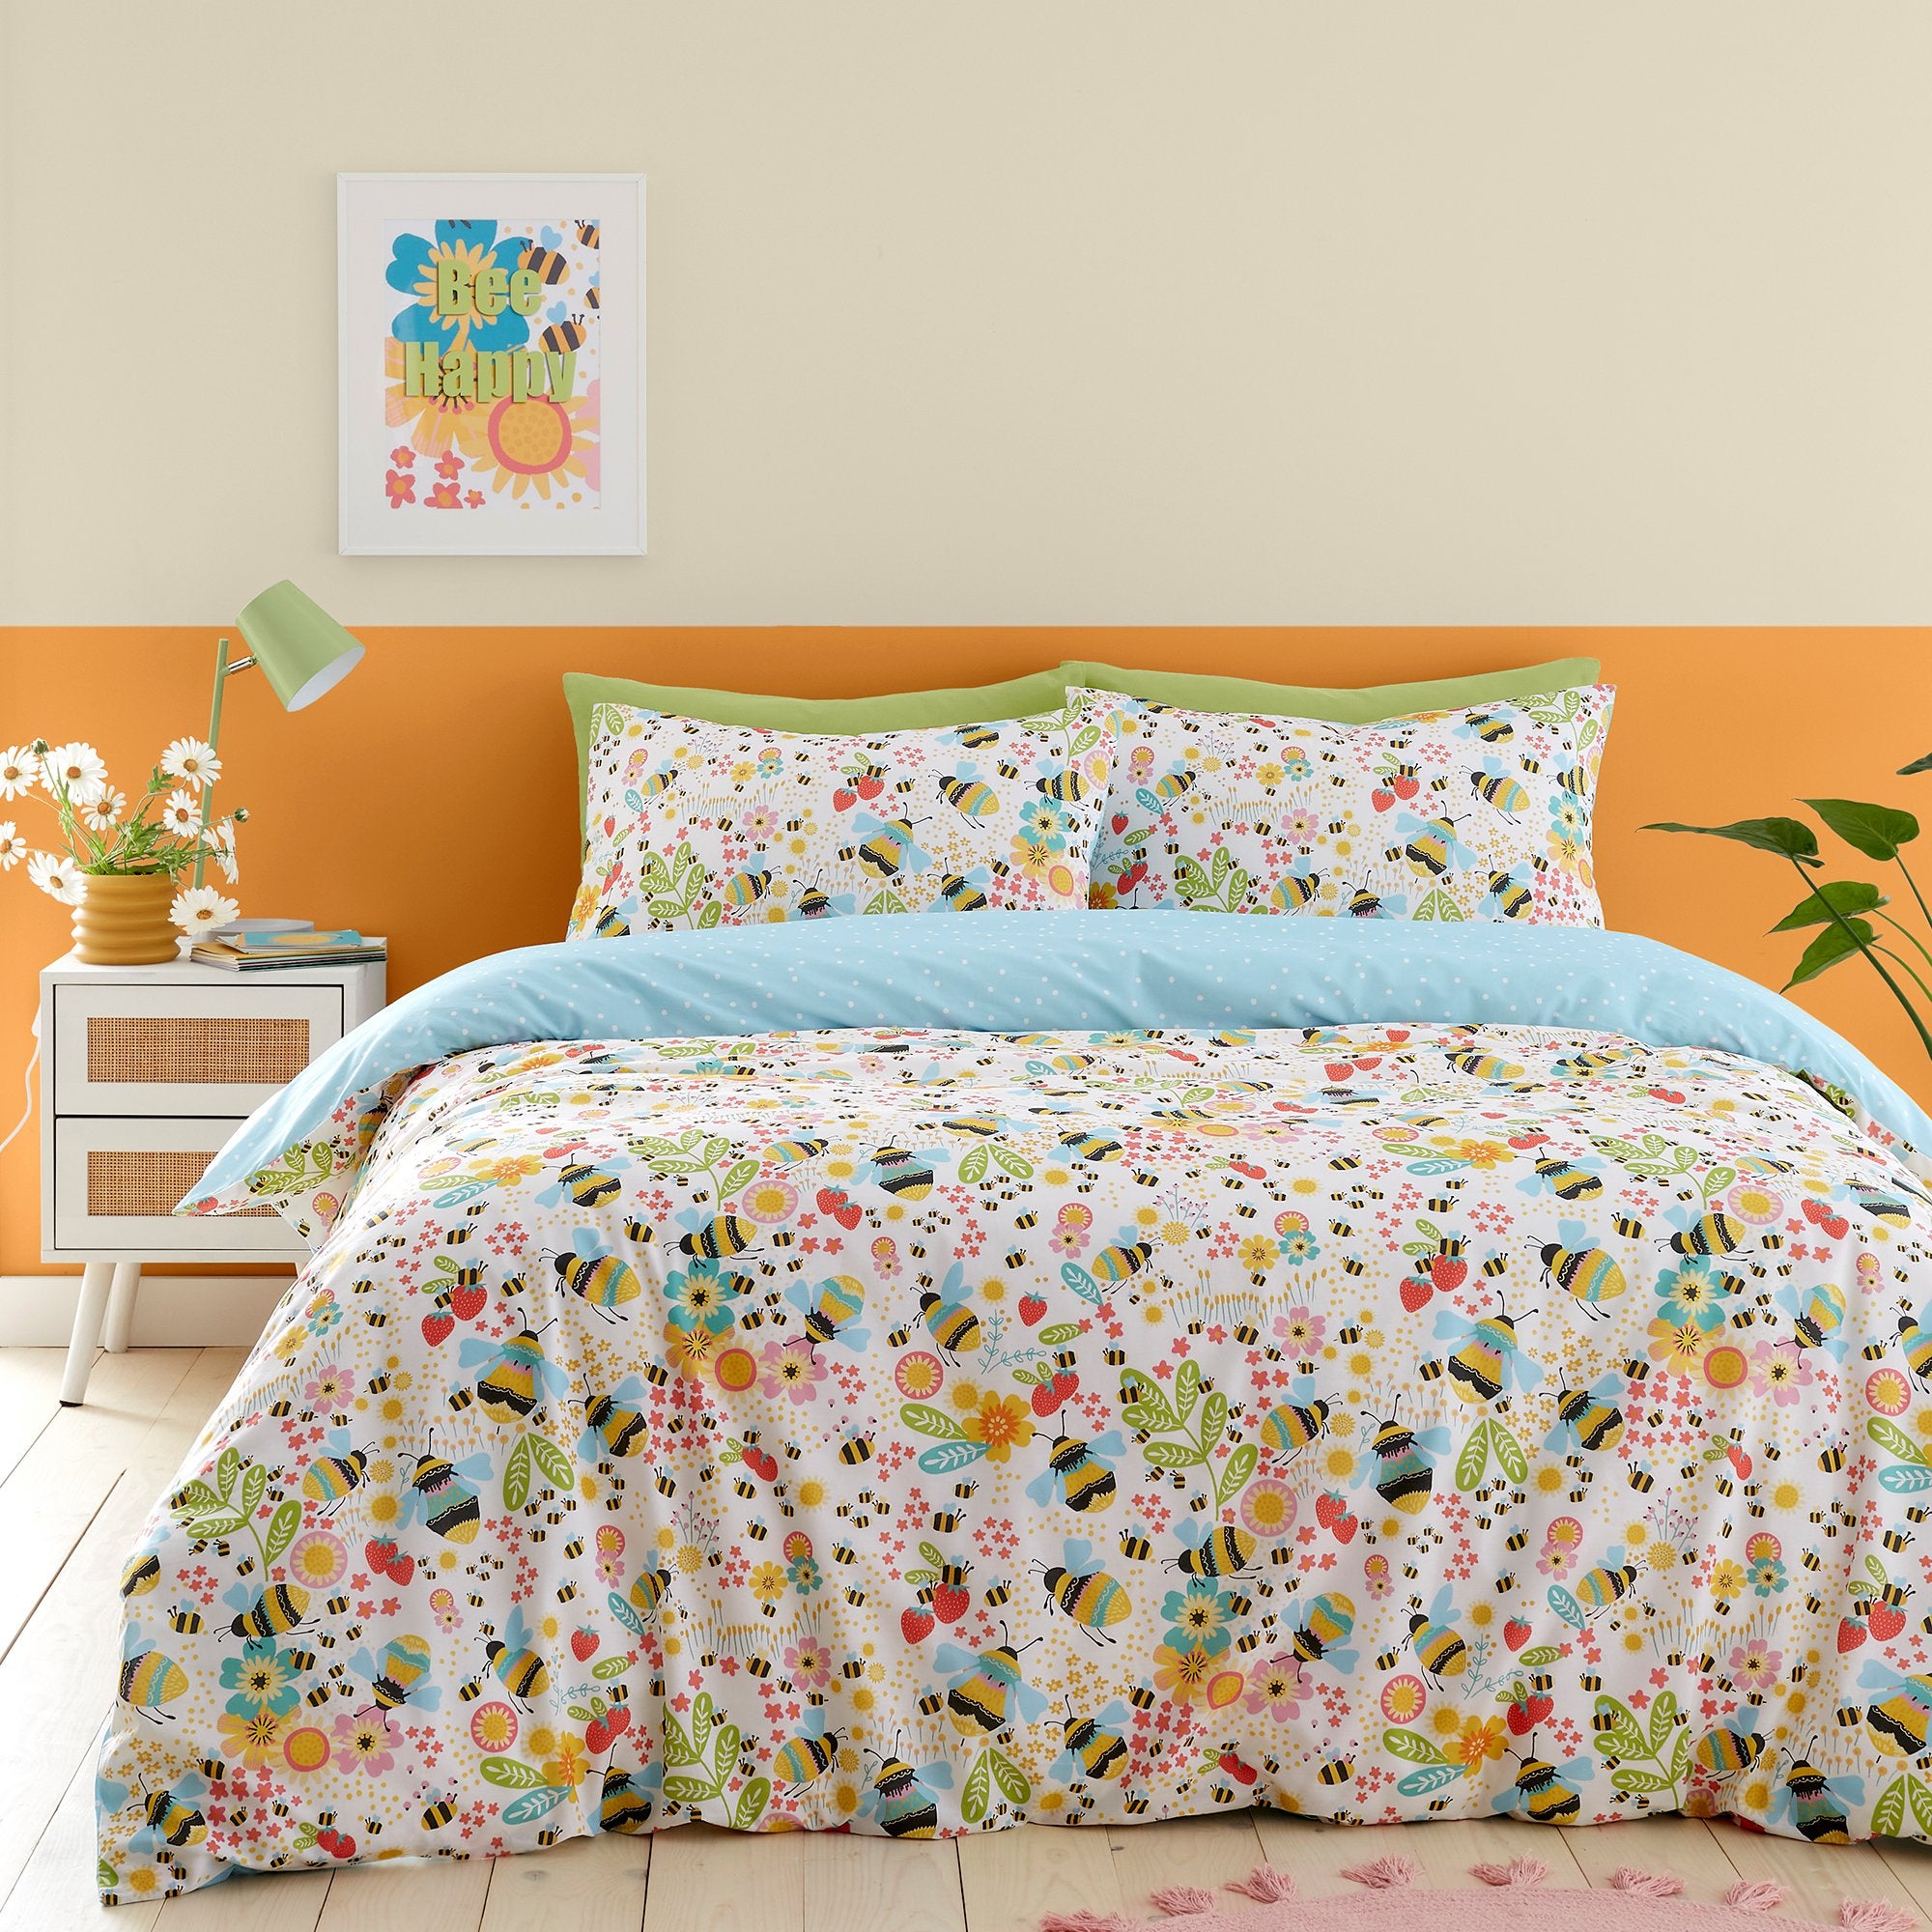 Duvet Cover Set Buzzy Bee by Fusion in Ochre